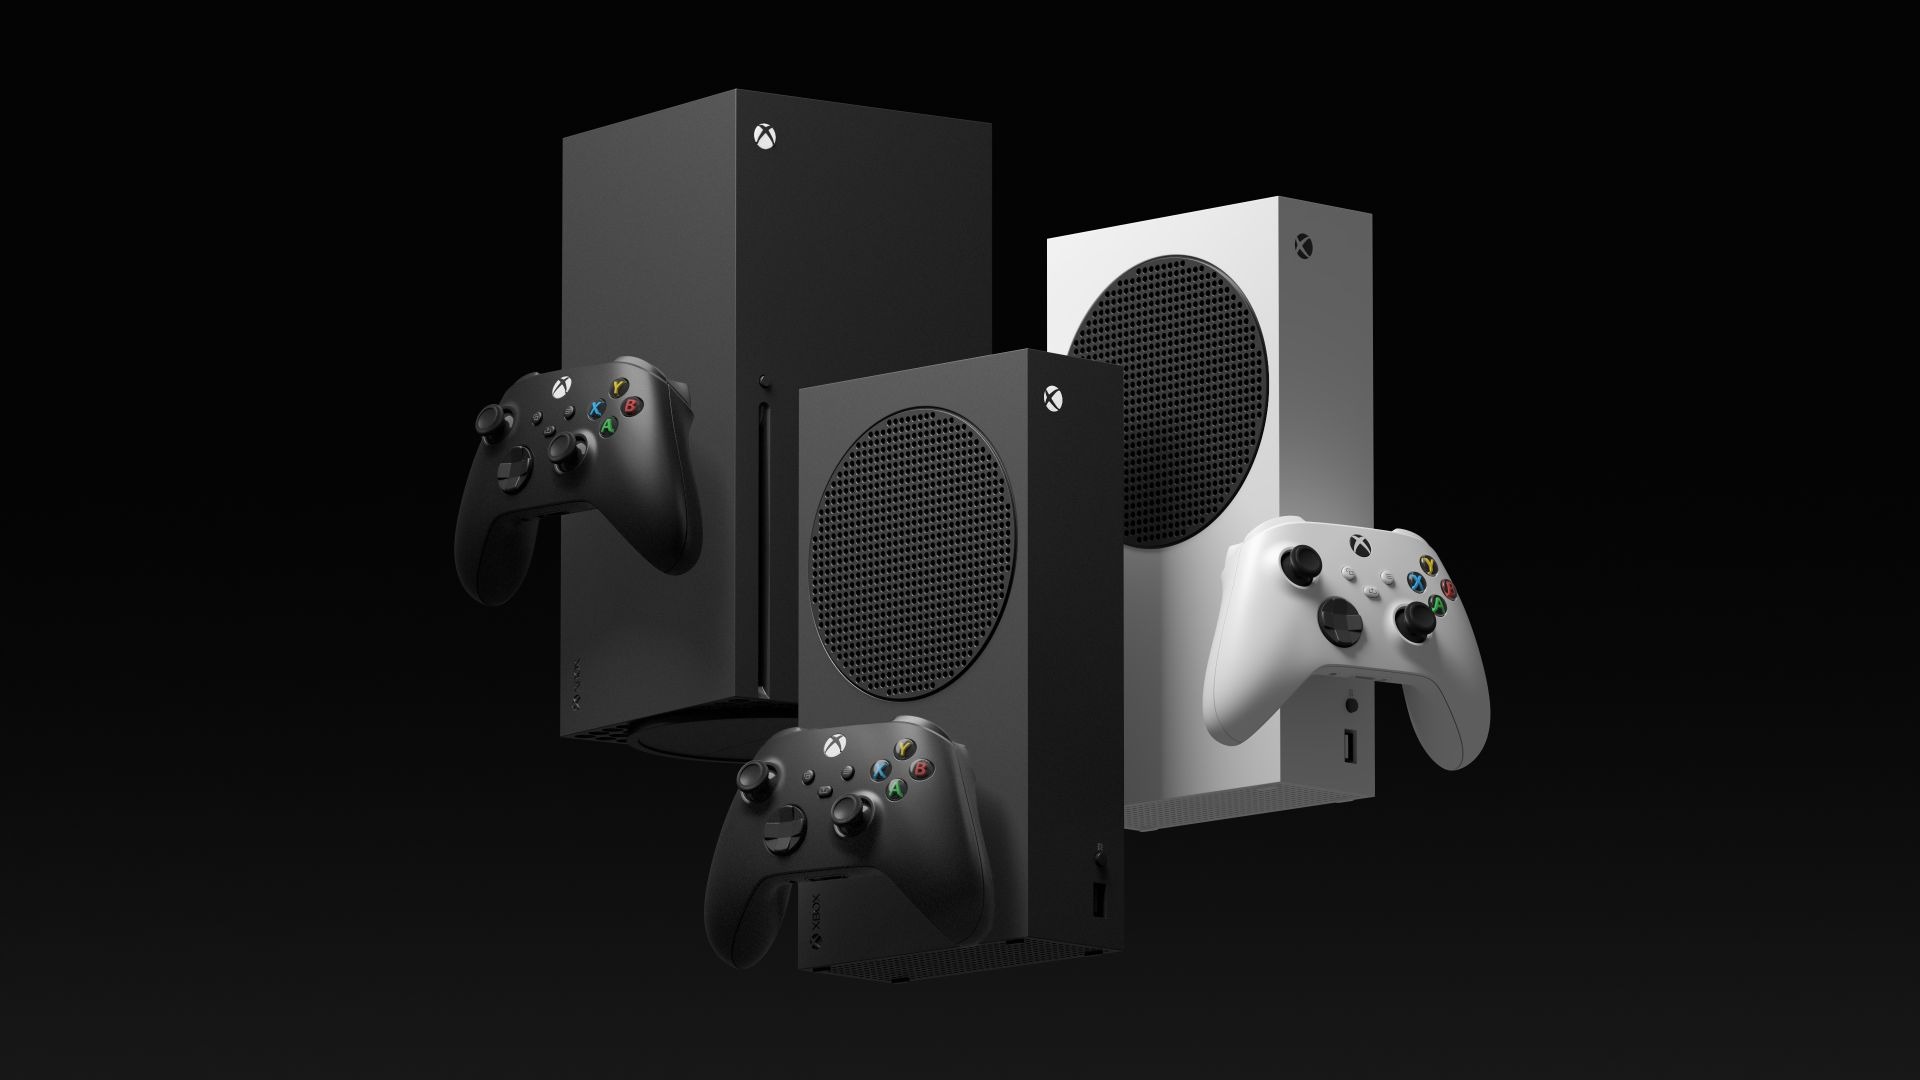 Behind the Design: Xbox Series X and Xbox Series S